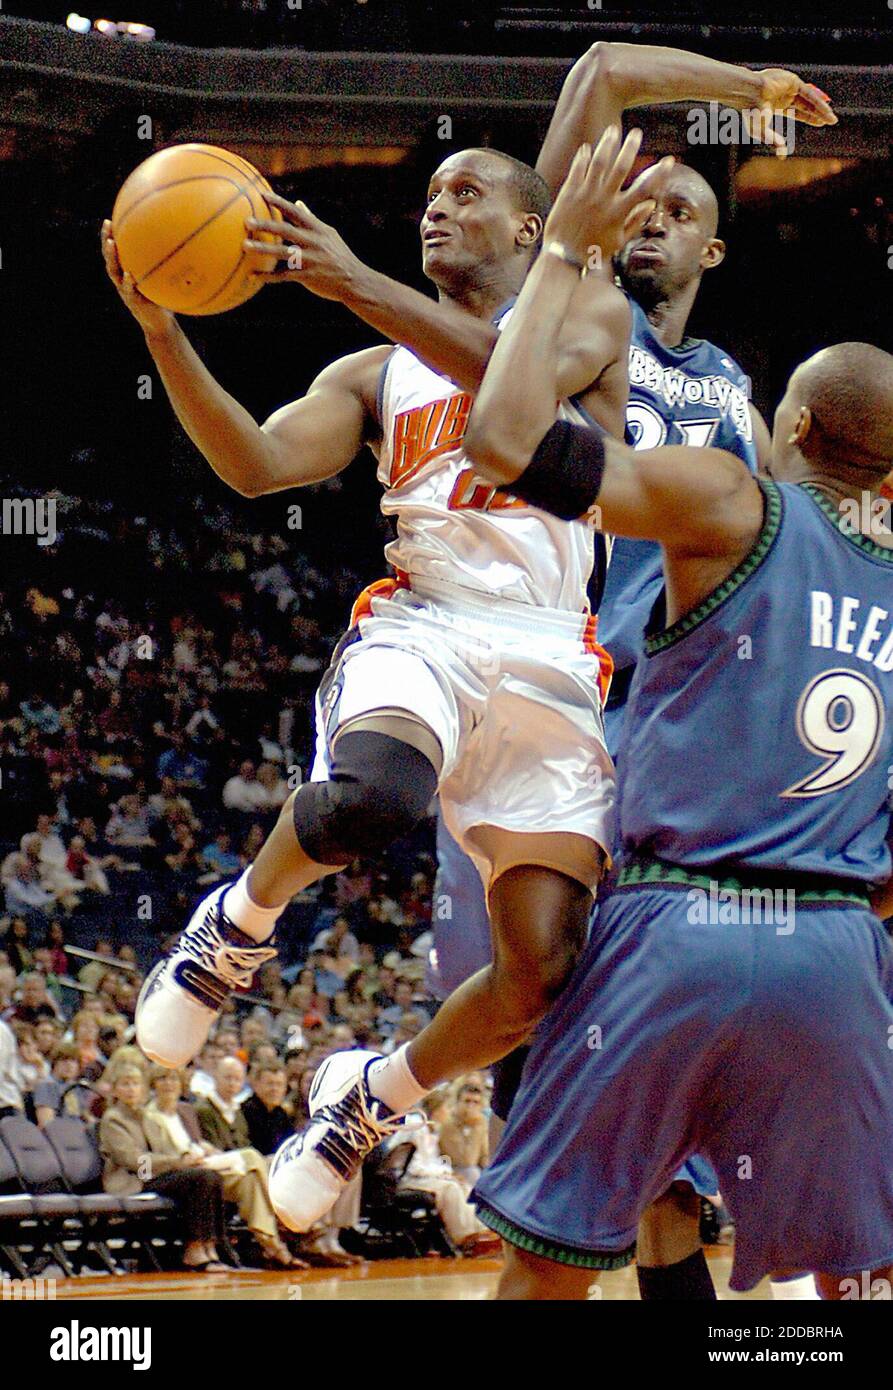 NO FILM, NO VIDEO, NO TV, NO DOCUMENTARY - Charlotte Bobcats' Brevin Knight (22) drives past Minnesota Timberwolves' Kevin Garnett, back, and Justin Reed (9) on his way to a team-high 24 points. The Bobcats defeated the Timberwolves 97-92 at the Bobcats Arena in Charlotte in Charlotte, NC, USA on April 4, 2006. Photo by Christopher A. Record/Charlotte Observer/KRT/Cameleon/ABACAPRESS.COM Stock Photo